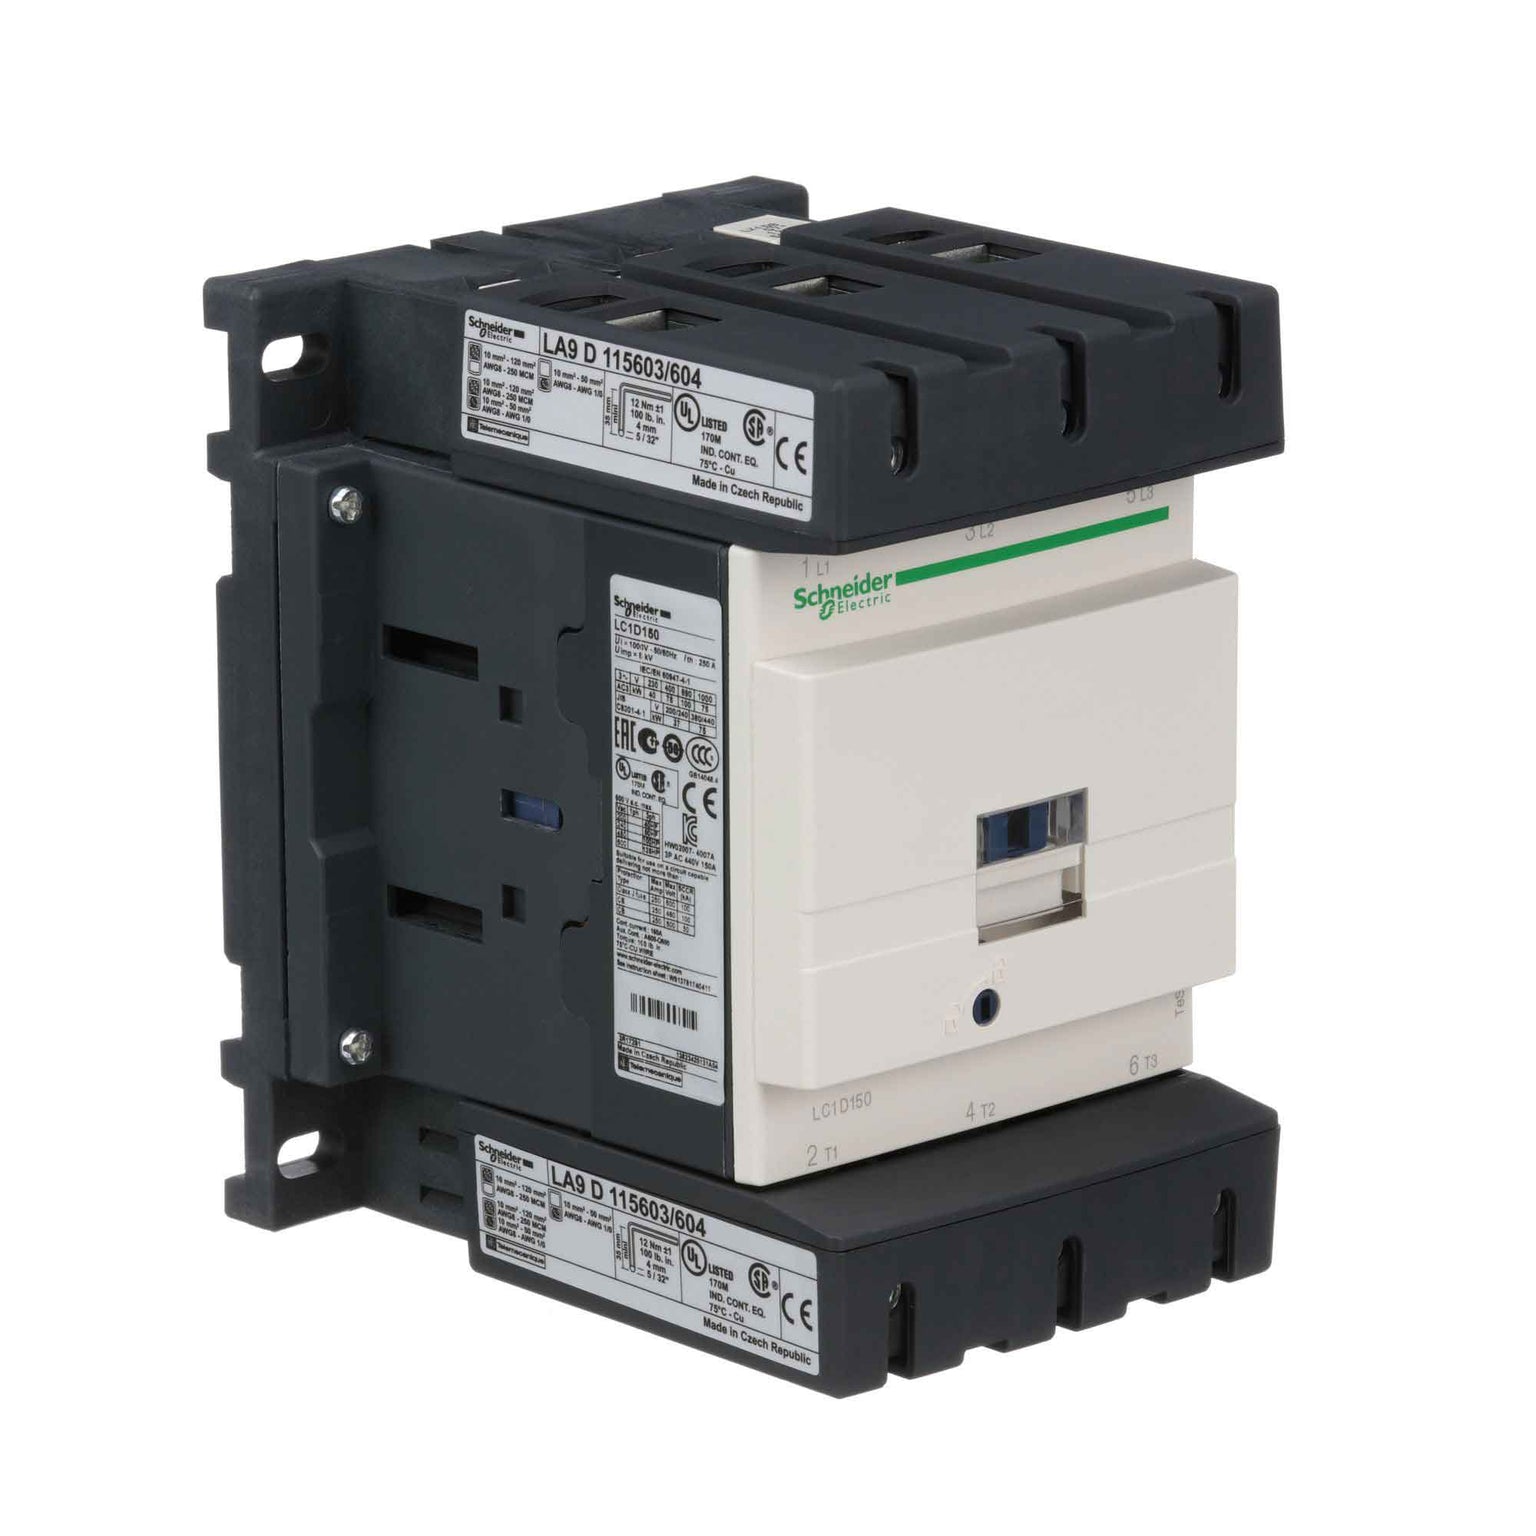 LC1D150G7 - Square D - Magnetic Contactor